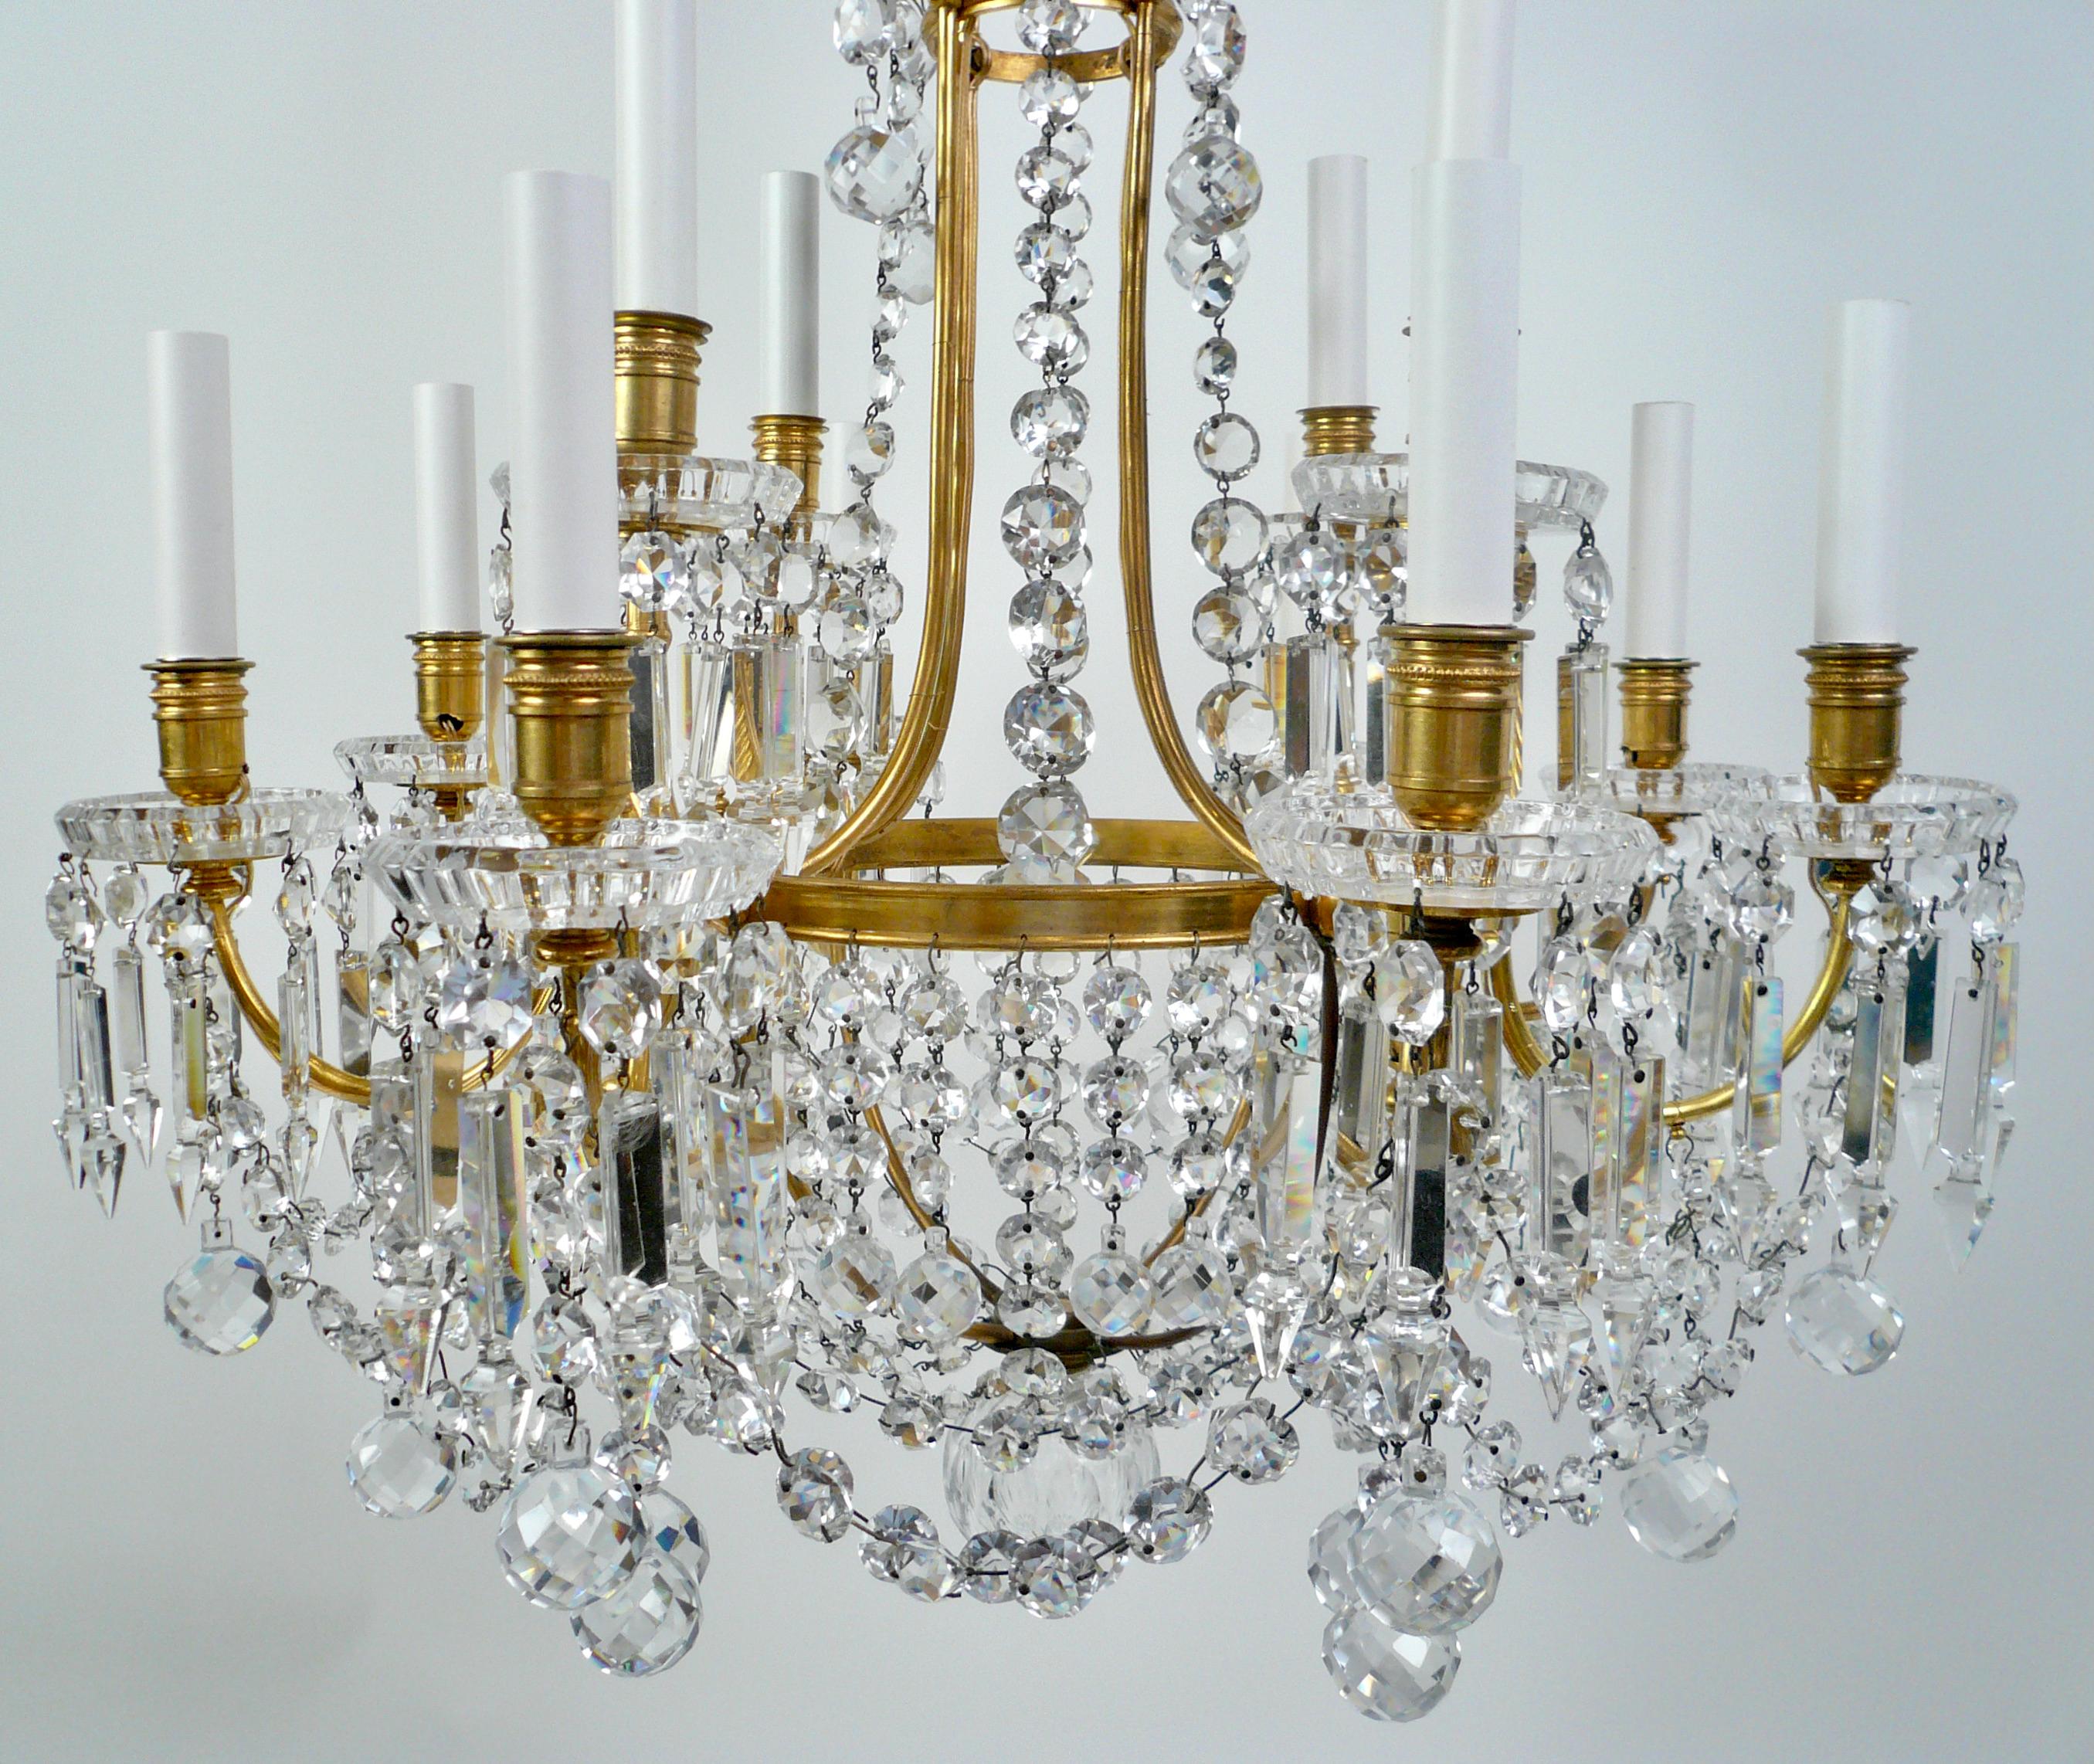 Signed Baccarat Gilt Bronze and Crystal 12 Light Chandelier, circa 1890 For Sale 4